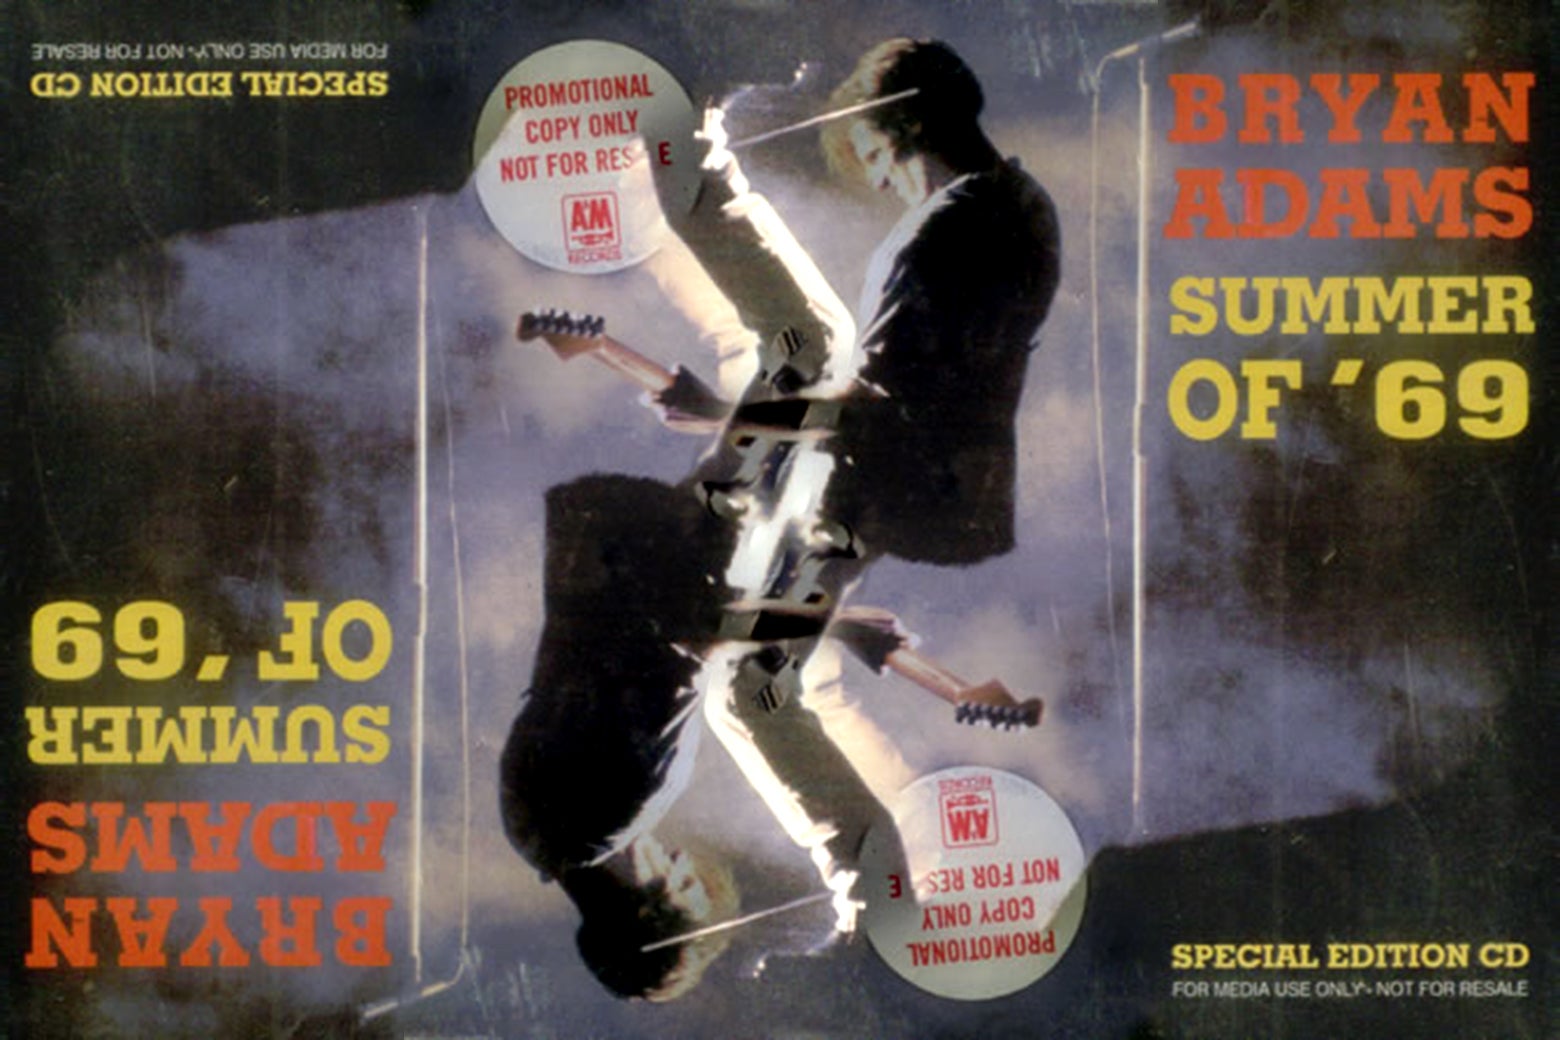 Two images of the cover for Bryan Adams' "Summer of '69" single, inverted and superimposed on each other.